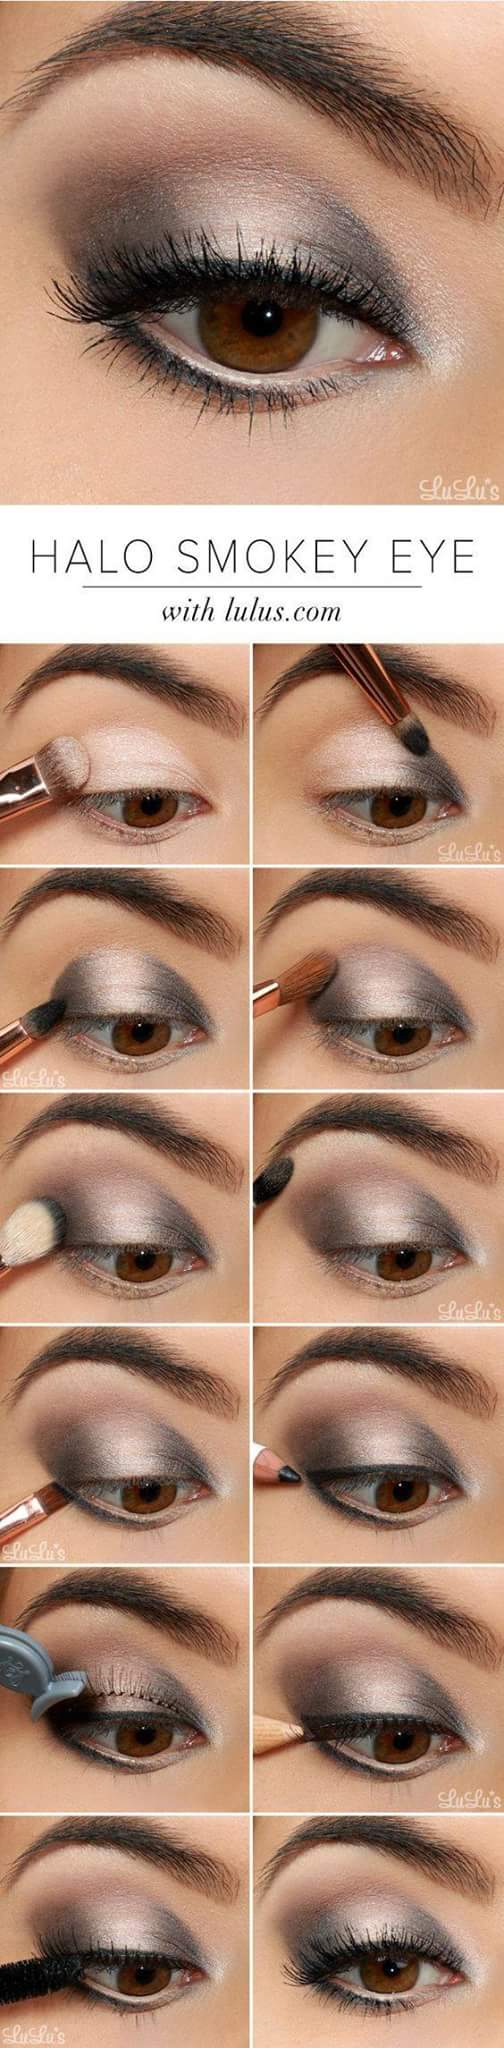 Purple And Gold Eye Makeup Tutorial 15 Smokey Eye Tutorials Step Step Guide To Perfect Hollywood Makeup